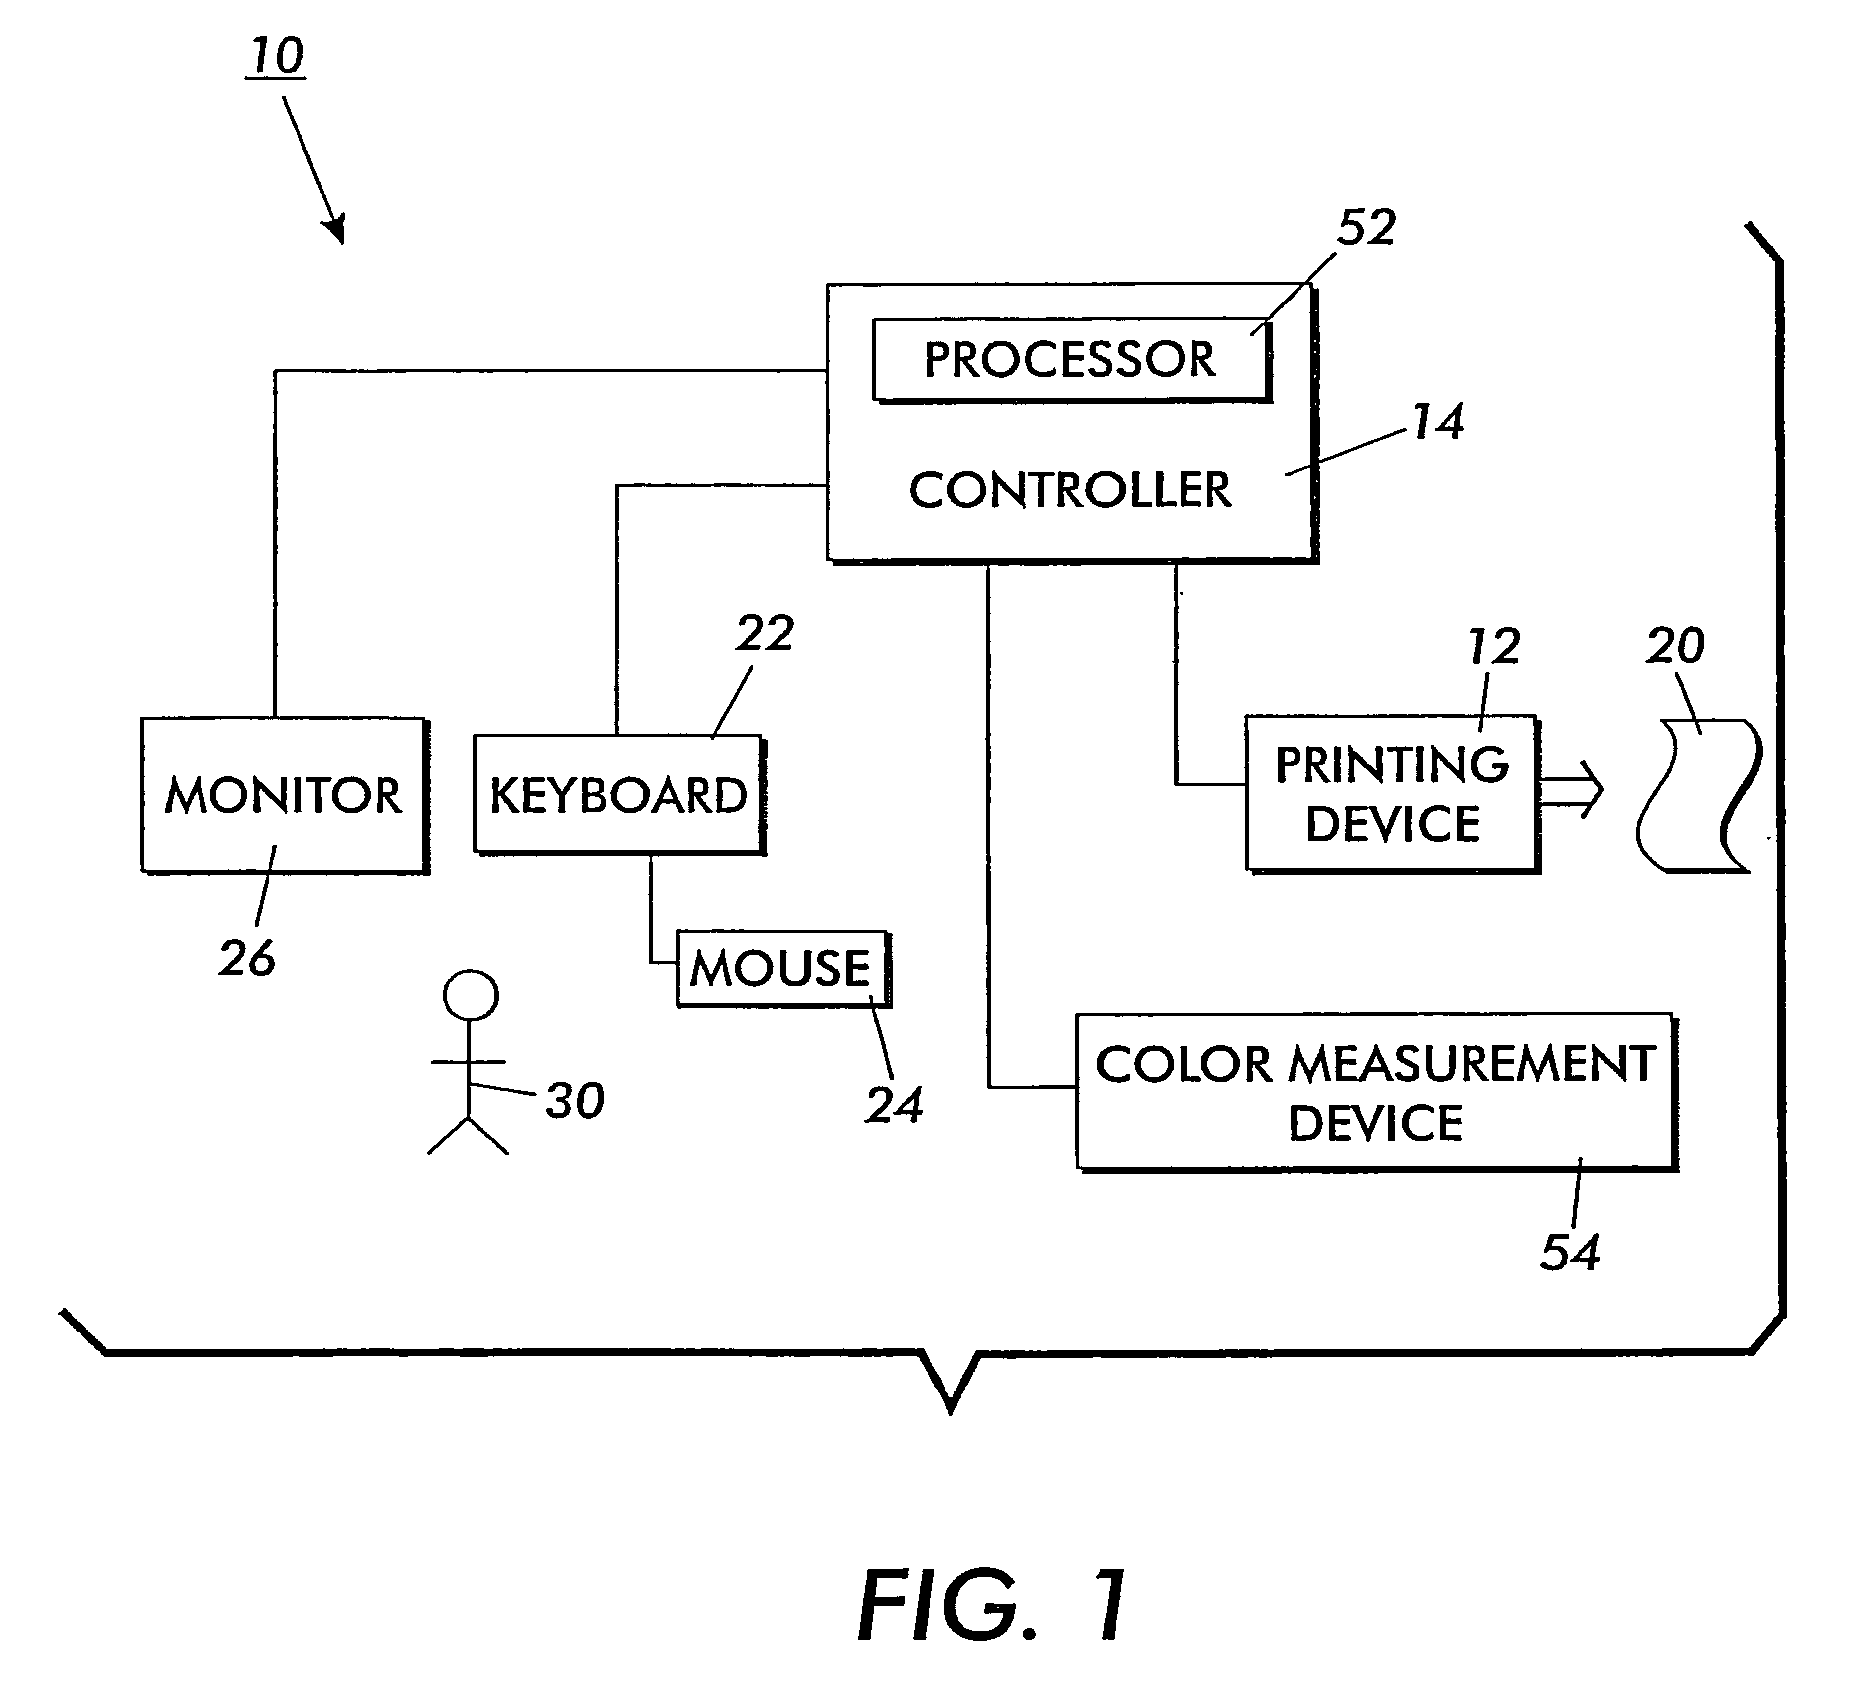 Increased temporal flexibility when performing/applying/reverting calibration for a printer output device